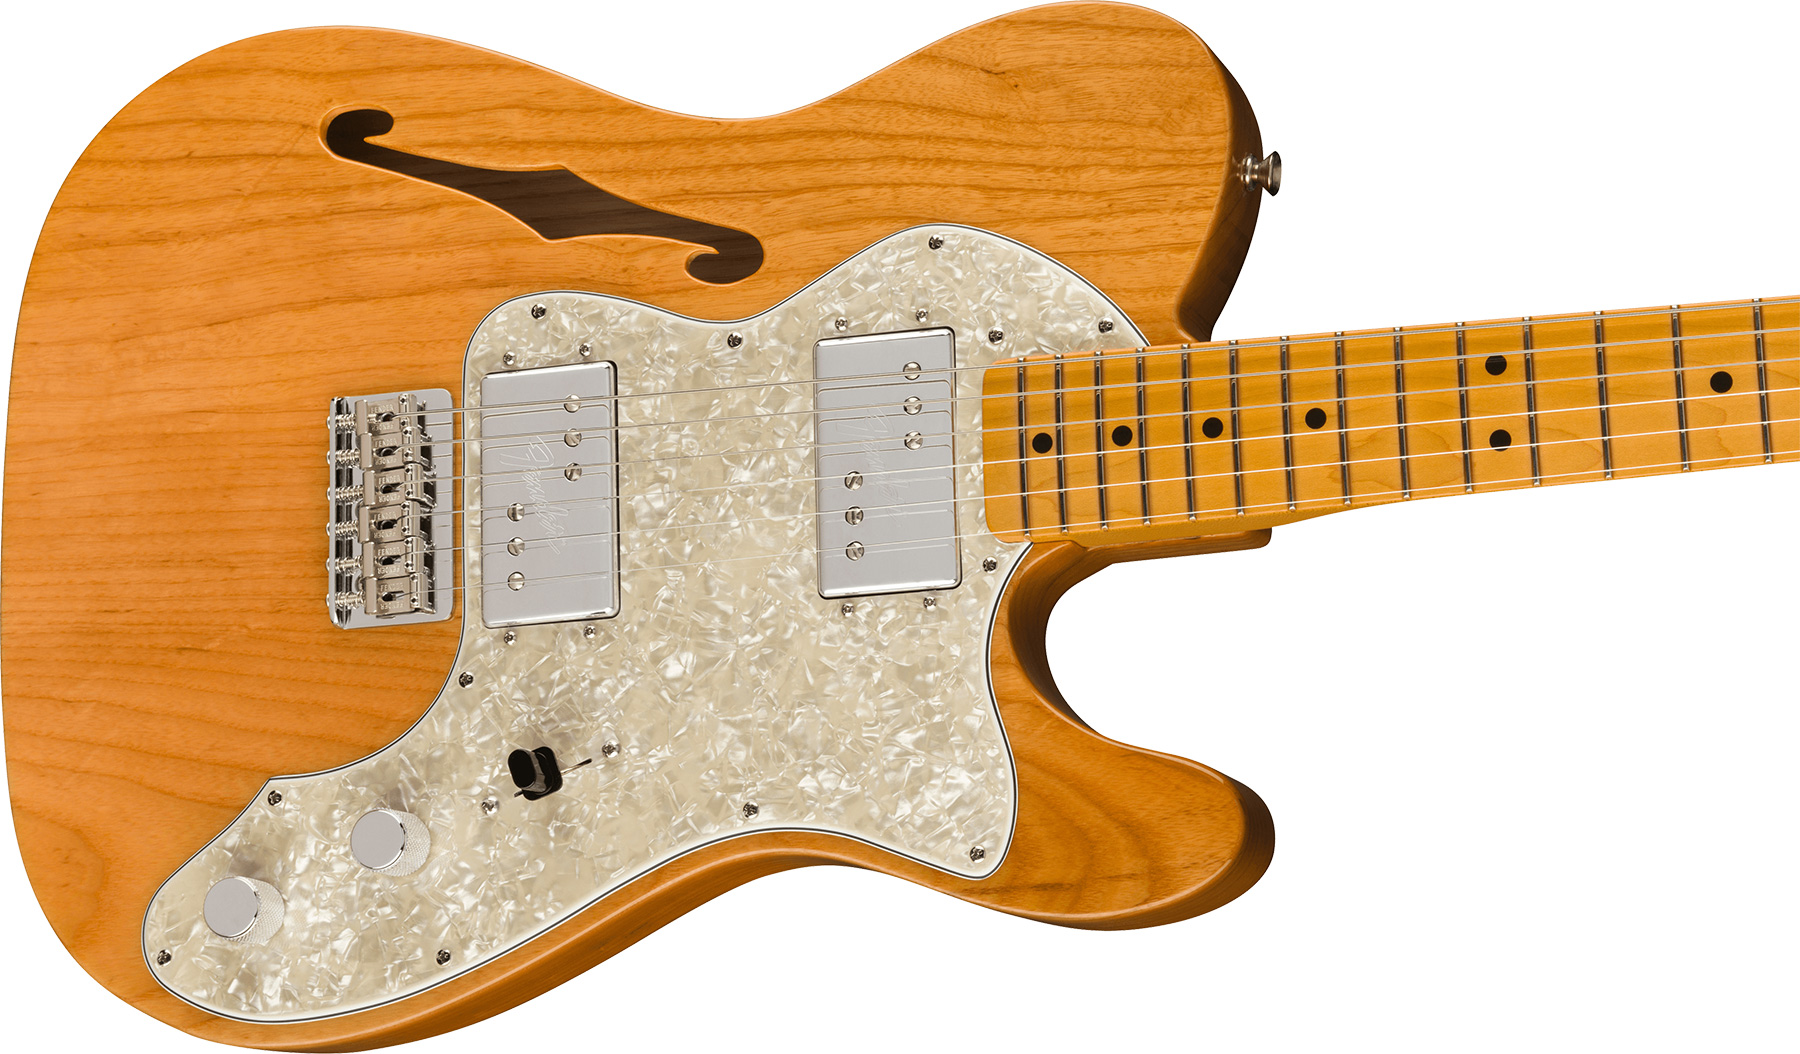 Fender Tele Thinline 1972 American Vintage Ii Usa 2h Ht Mn - Aged Natural - Semi-hollow electric guitar - Variation 2